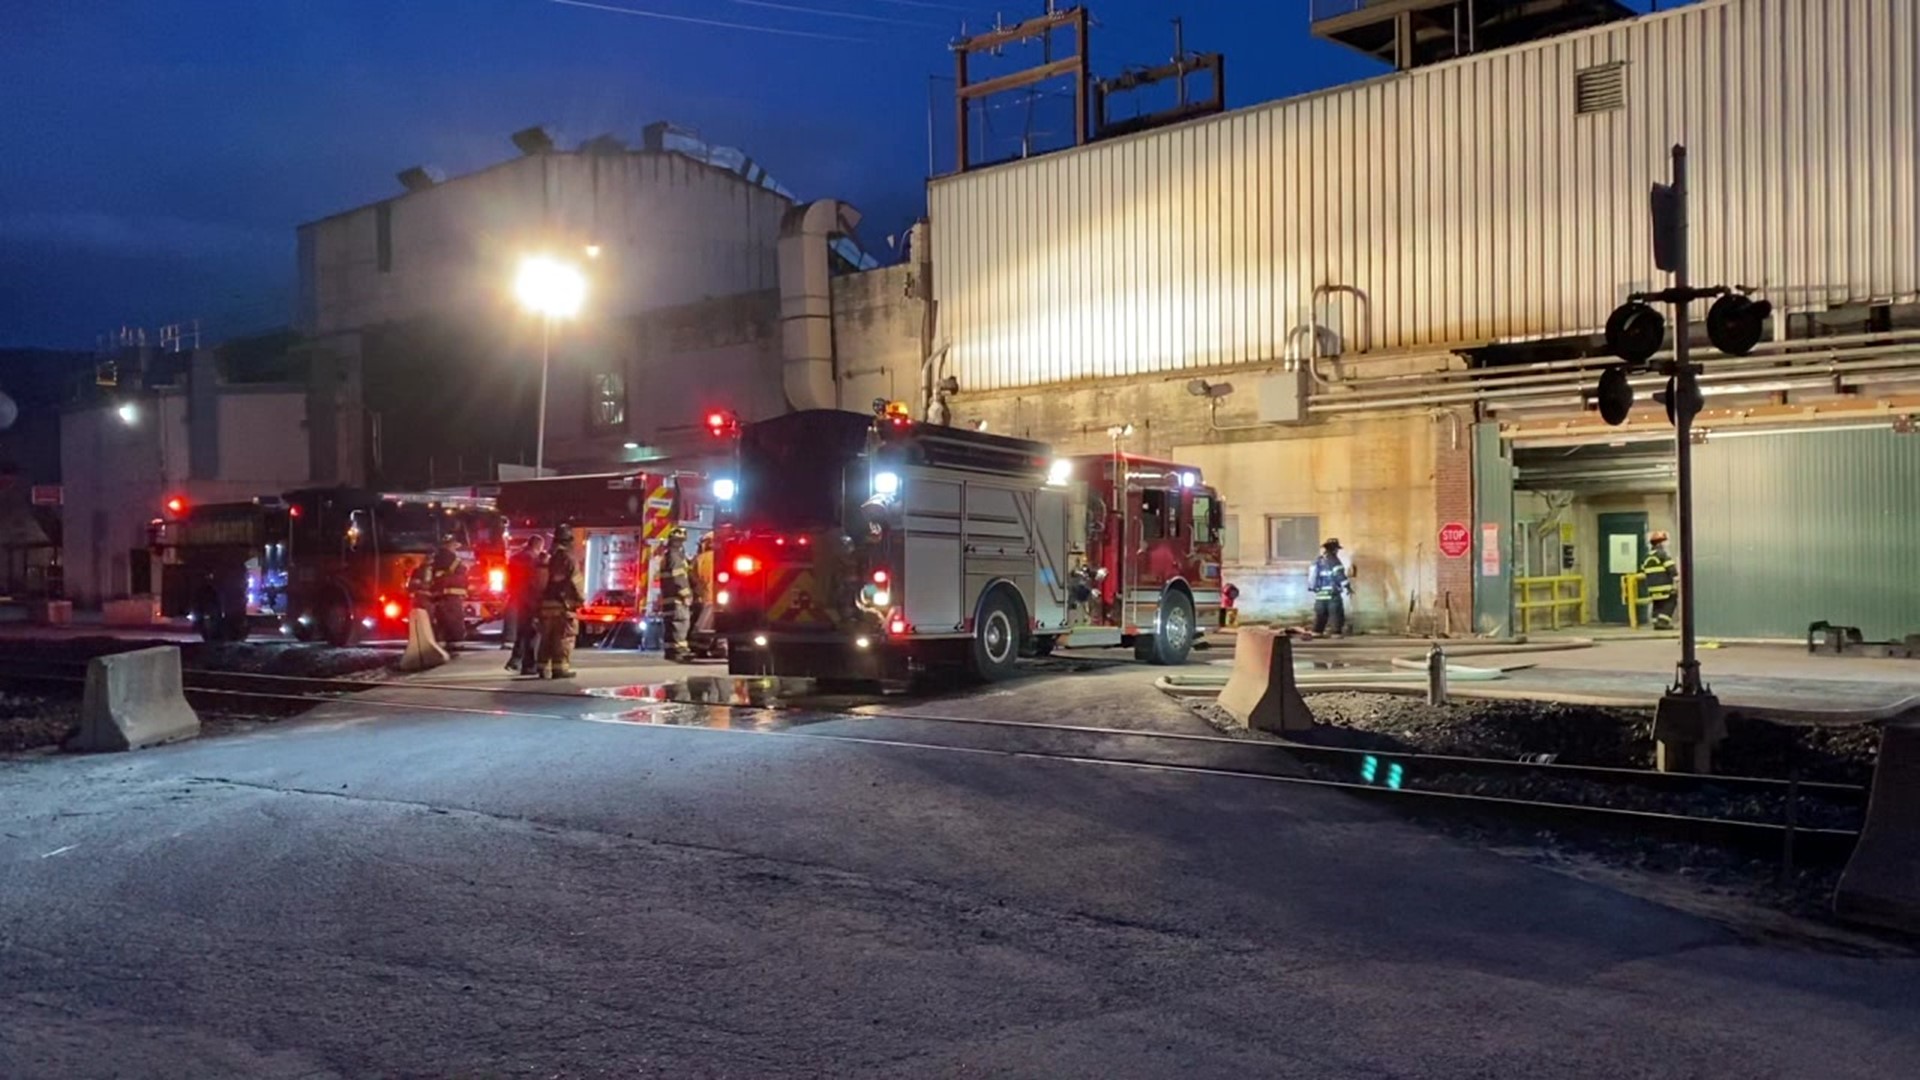 Officials said something got caught under a machine and caught fire at the plant.